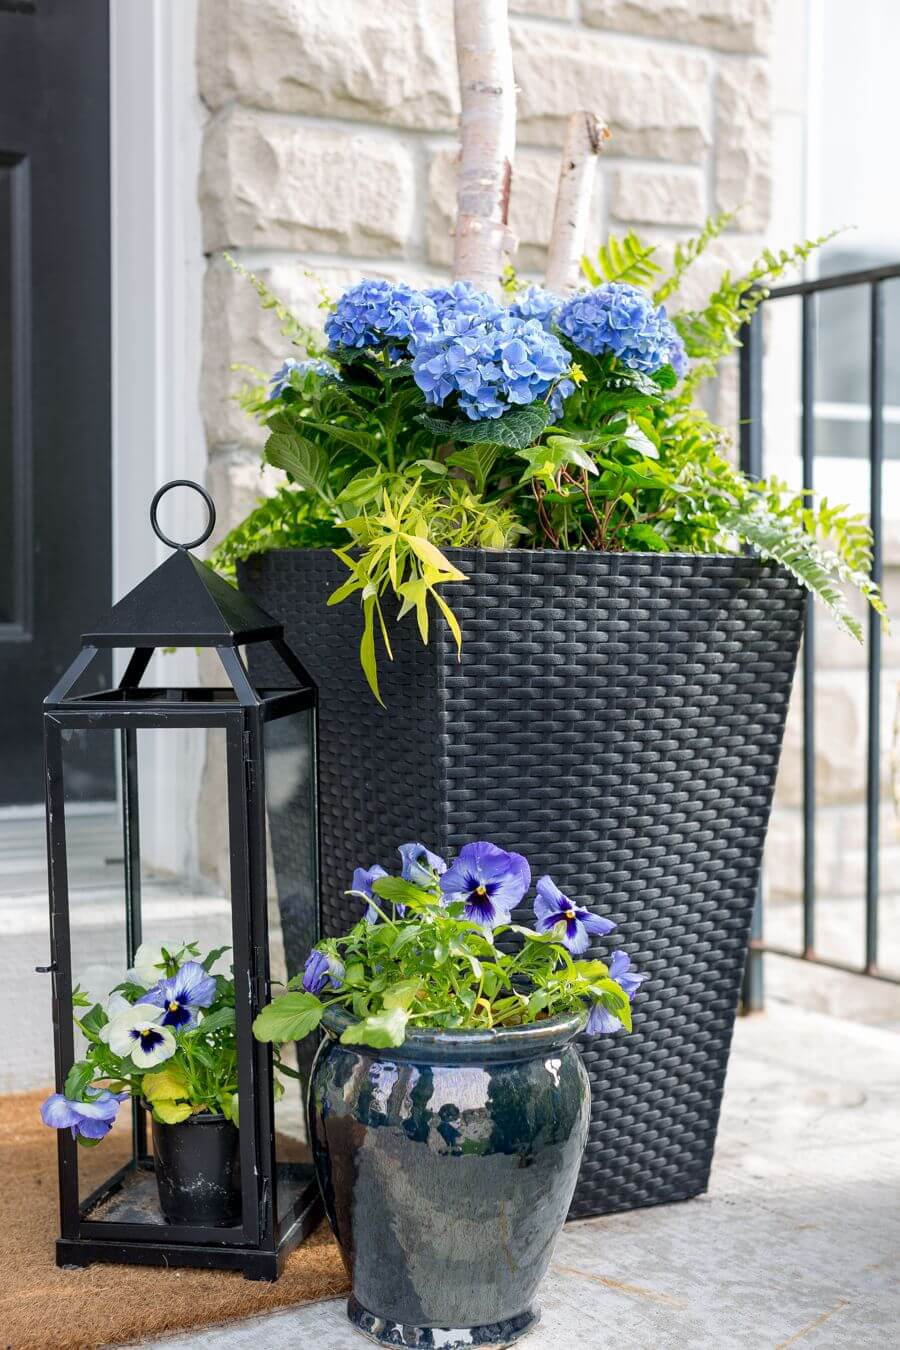 Hydrangeas in a Hamper with Pansies